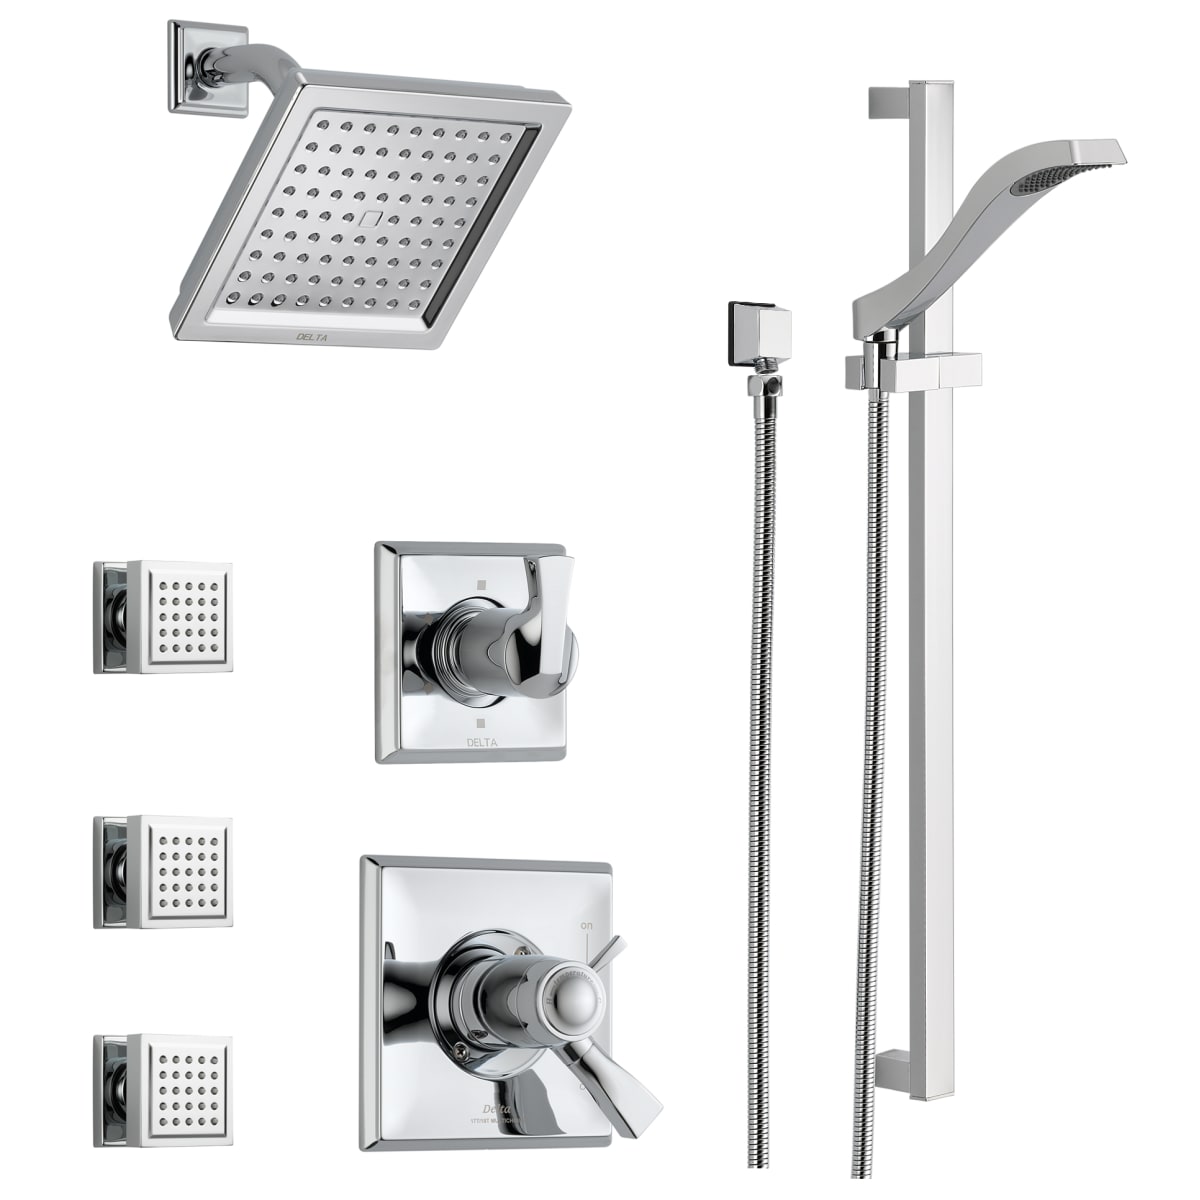 DSS-Dryden-17T03CZ and Champagne Rough-In TempAssure Shower Shower 3 Sprays Valves Series 17T - Includes Bronze Integrated Delta Shower Body with Thermostatic Head, Control, Volume Hand System